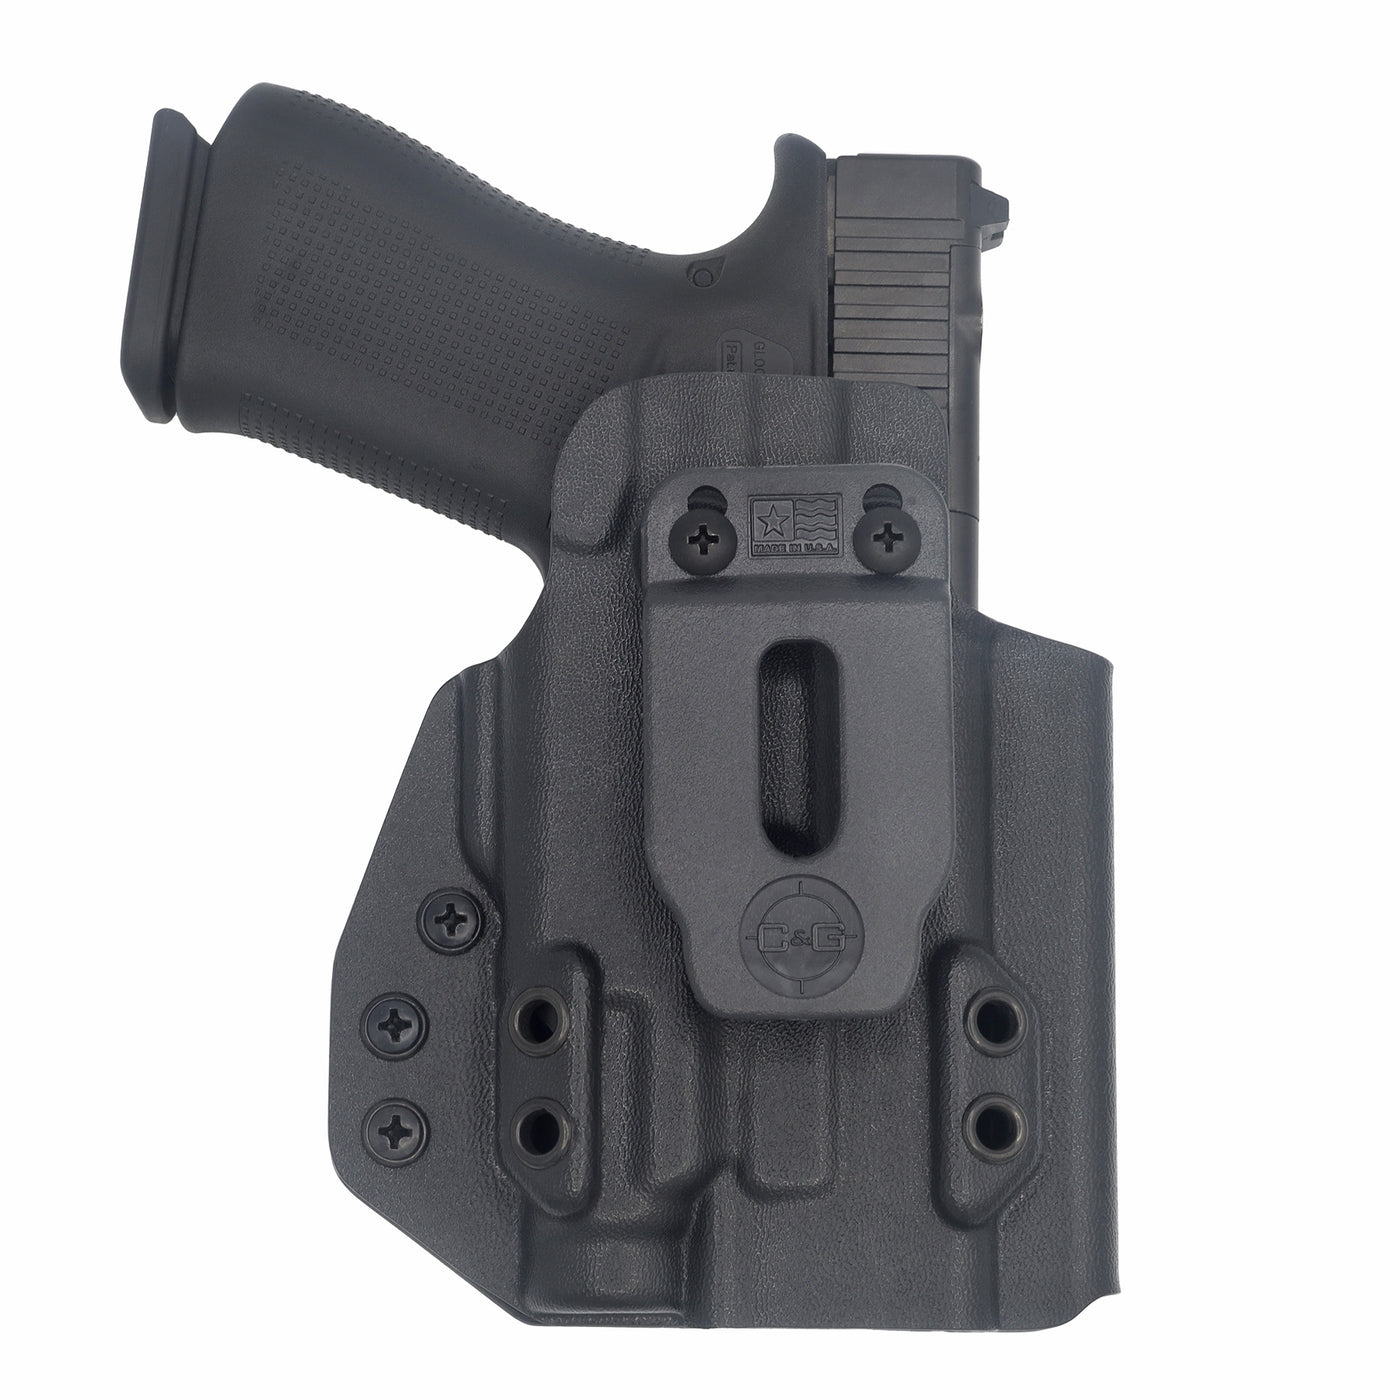 C&G Holsters custom IWB Tactical Shadow Systems CR920 Streamlight TLR7sub holstered